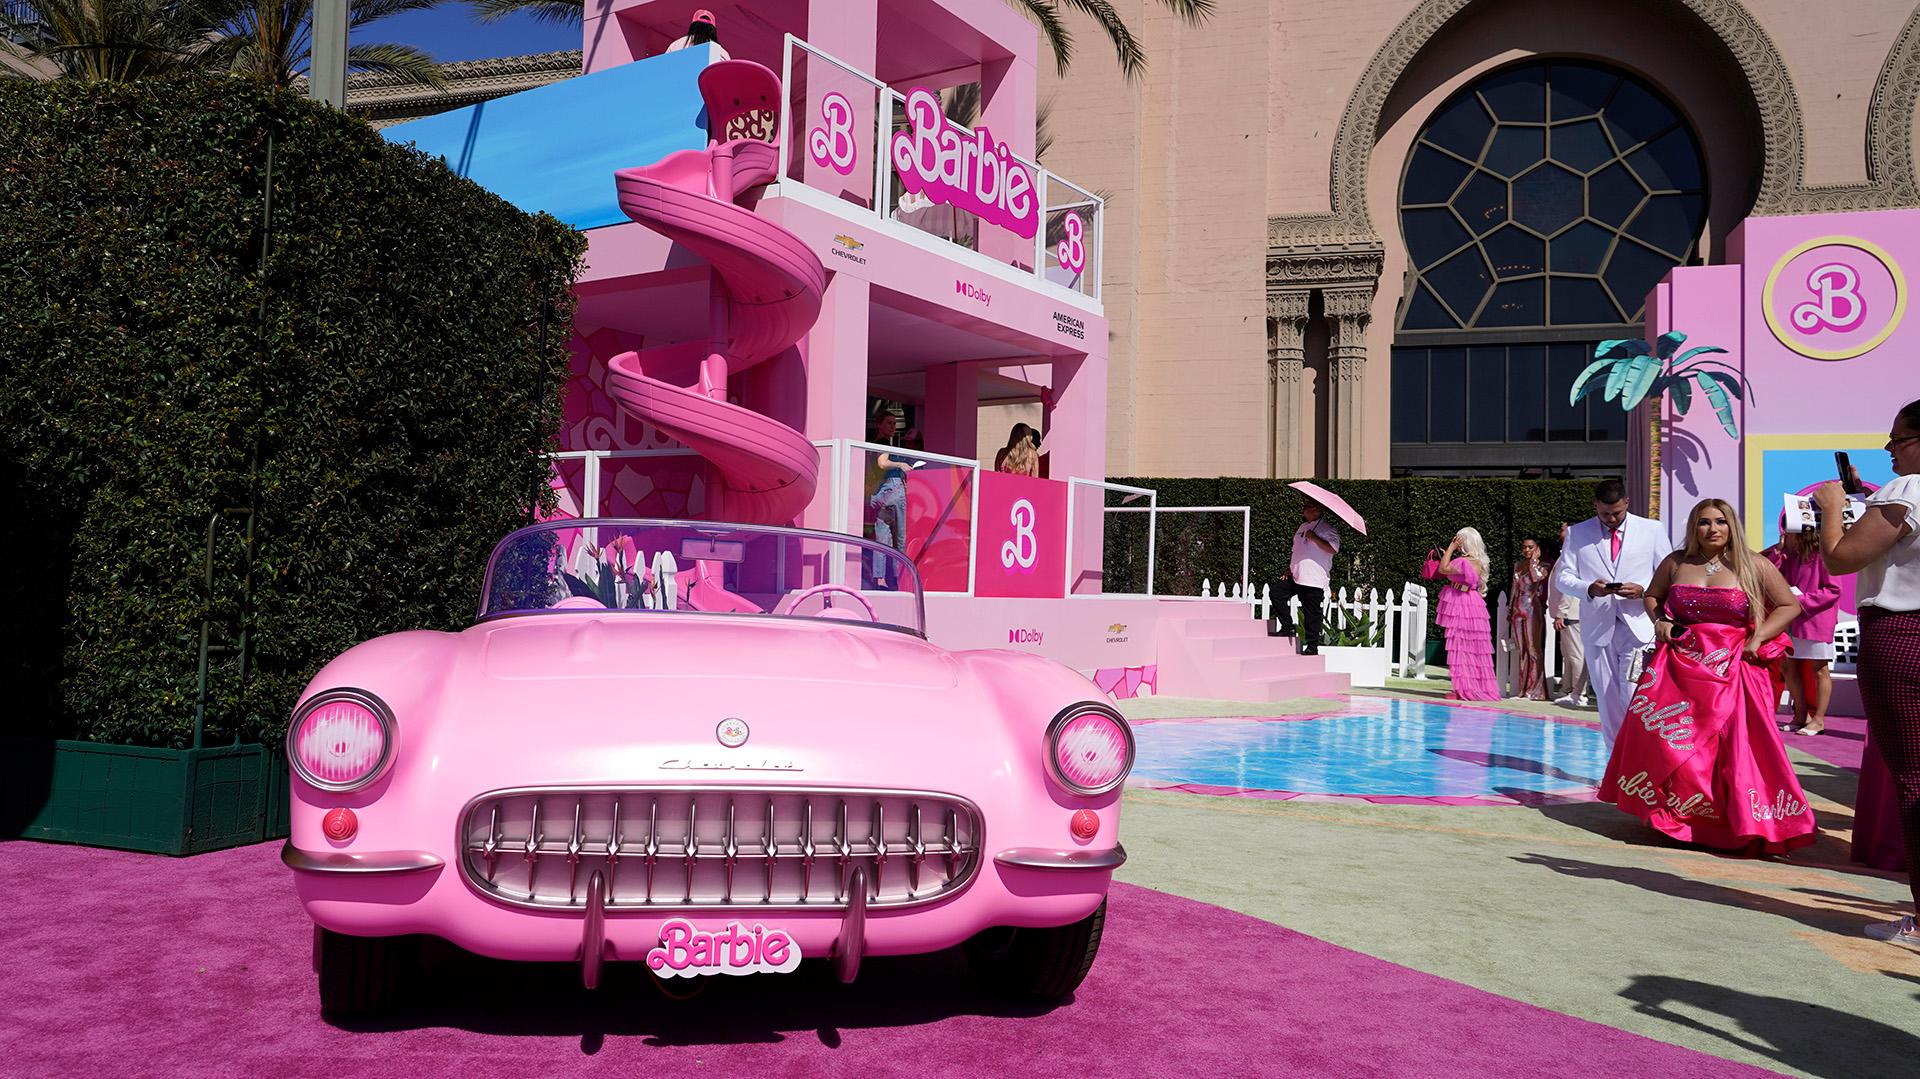 List Celebrate Barbie With These Events In The Tampa Bay Area